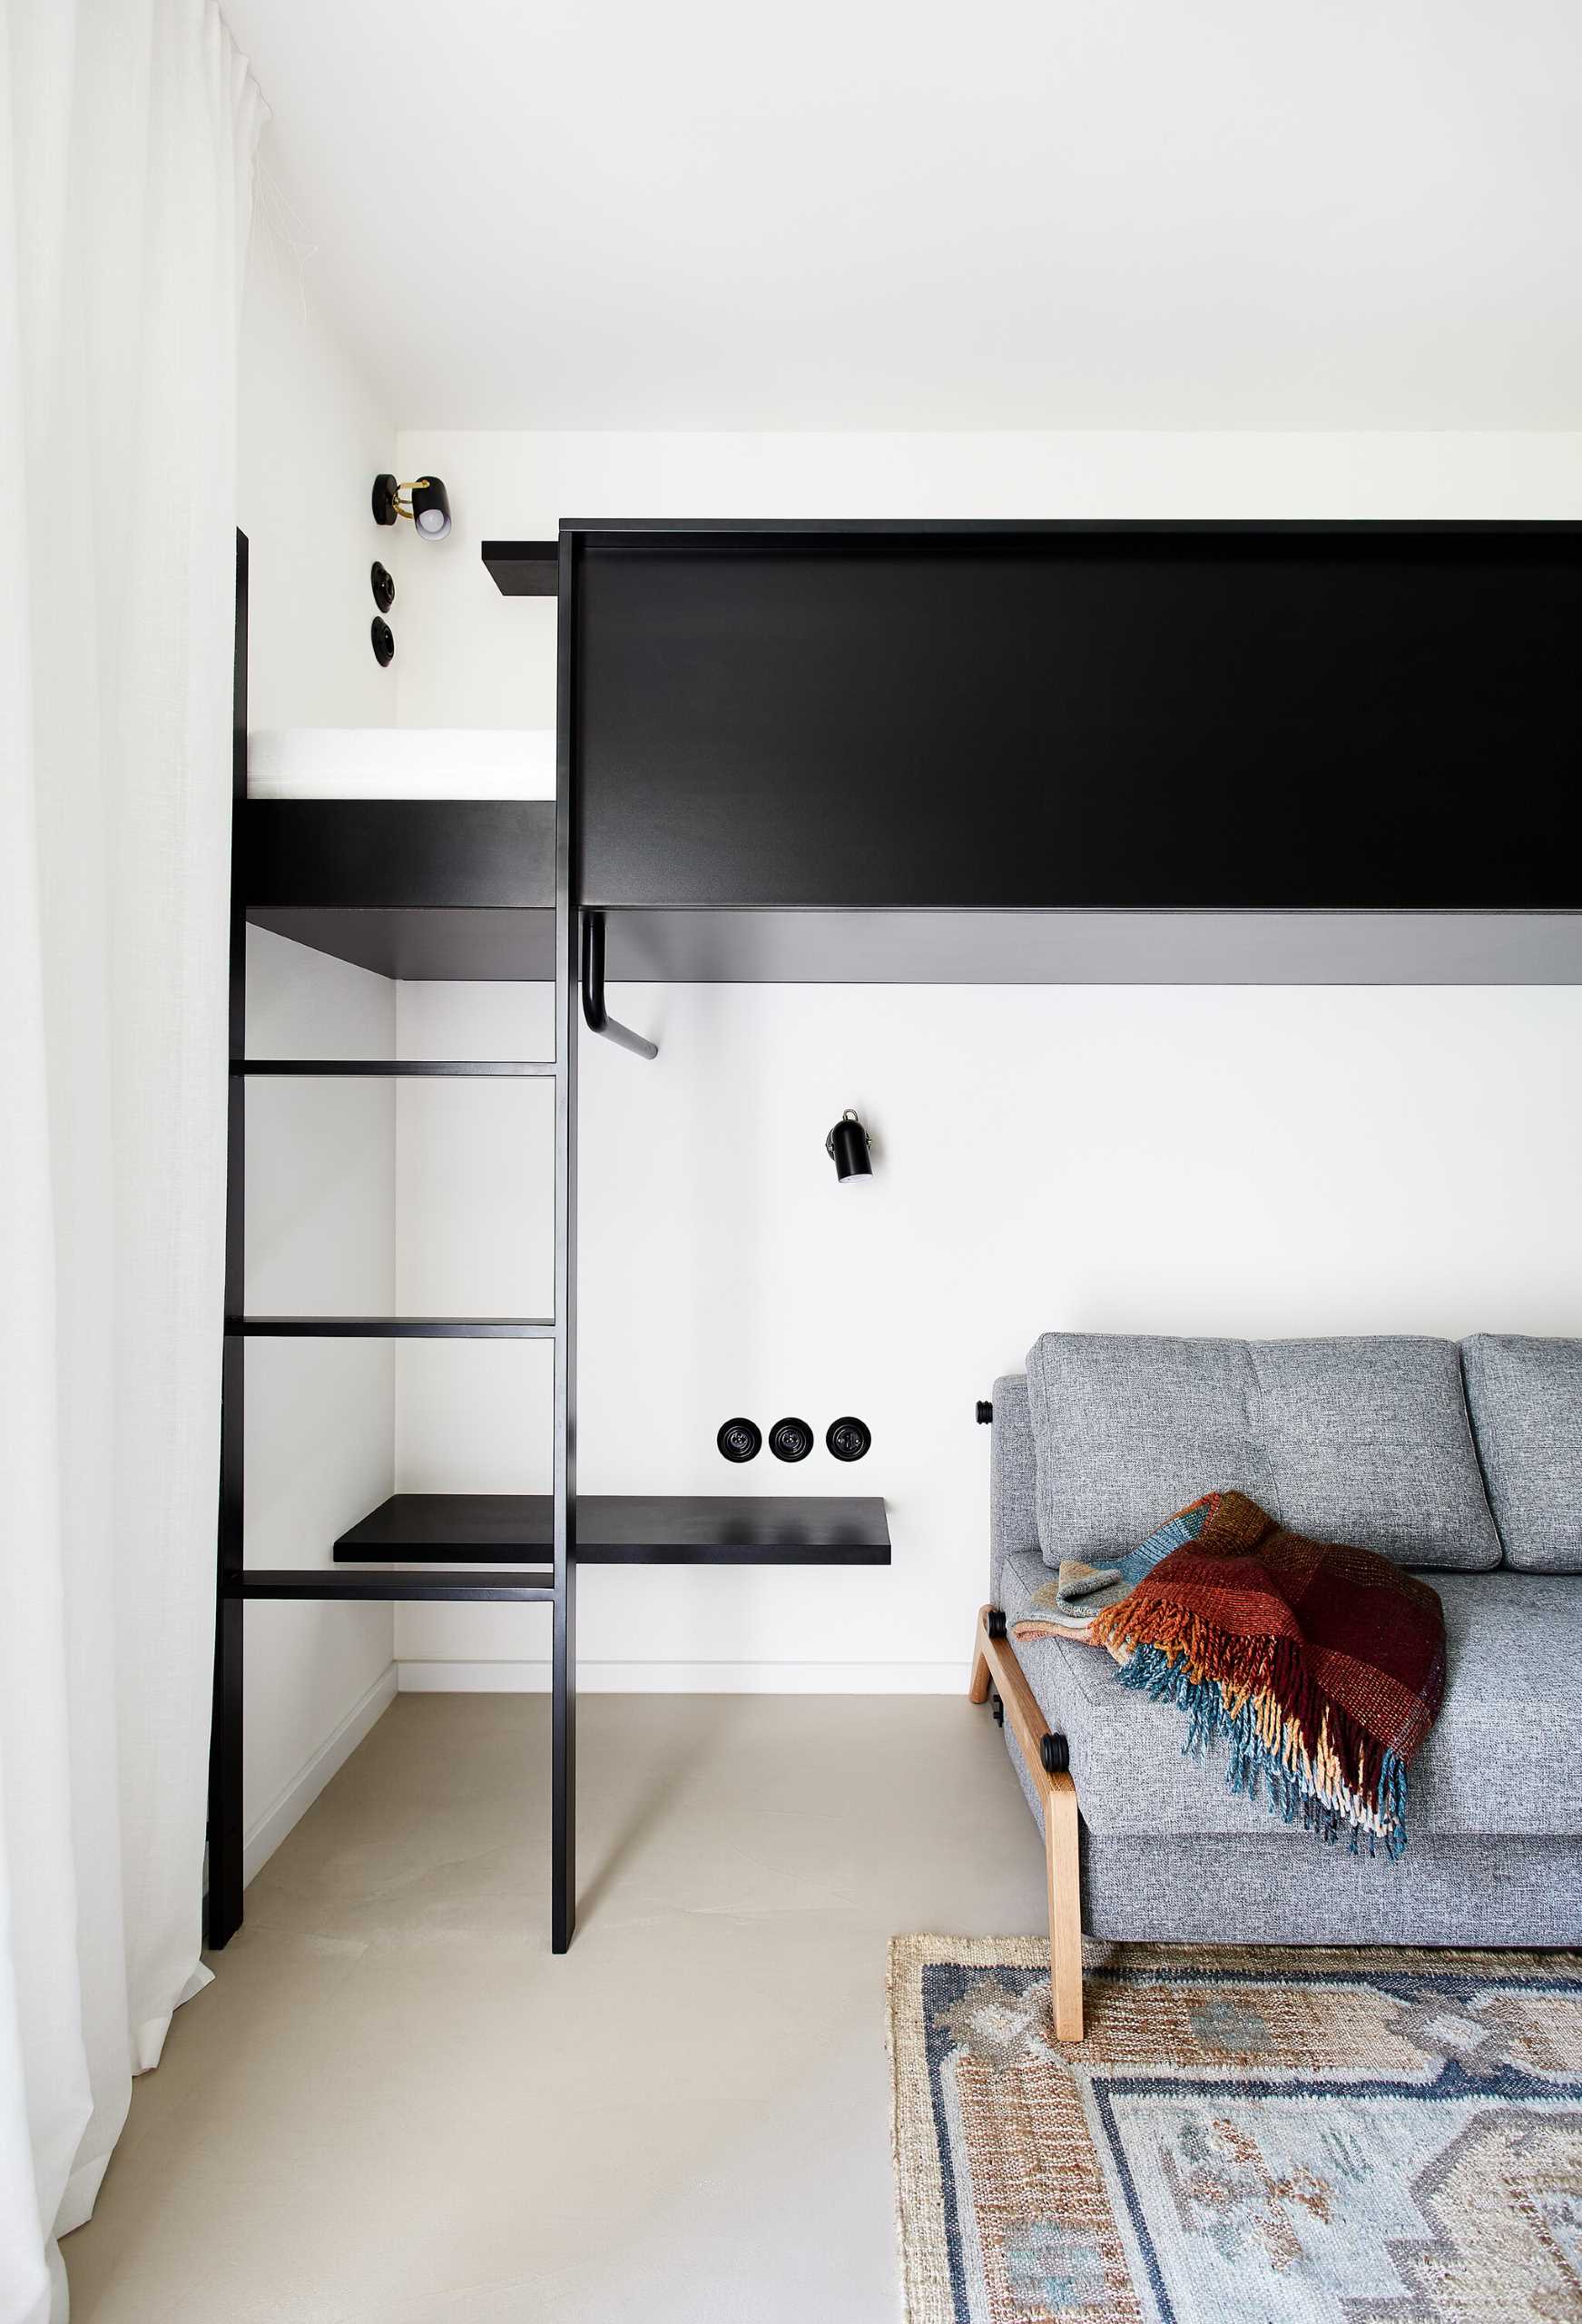 This modern bedroom includes two loft beds in a black frame. Underneath, there's a comfortable couch with two side tables. The couch can also be transformed into an additional bed.